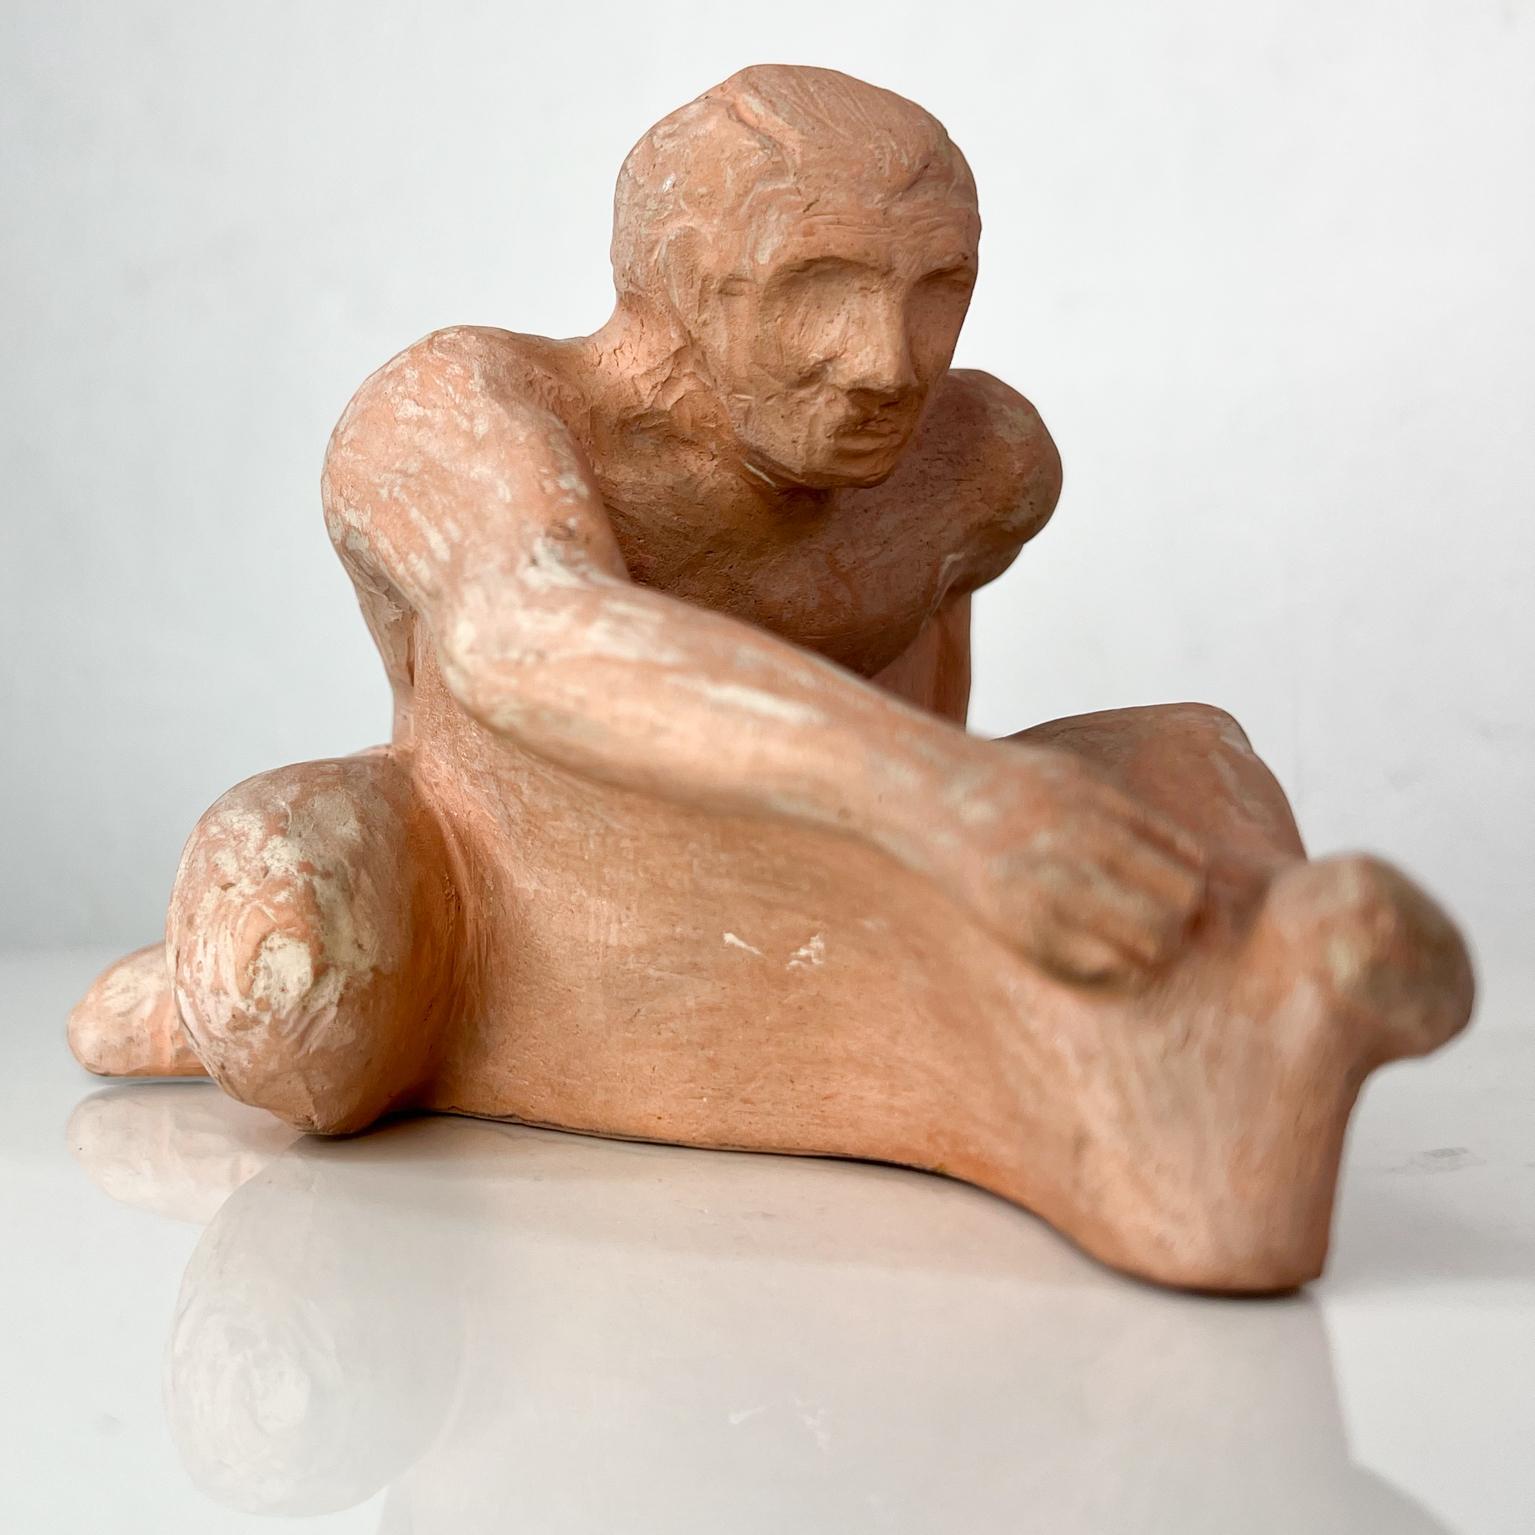 Mid-20th century terracotta art sculpture naked man athlete L Cook.
Signed at bottom L Cook.
Measures: 6.75 deep x 4.25 wide x 4.38 tall.
Preowned original vintage condition.
Refer to images provided.
 